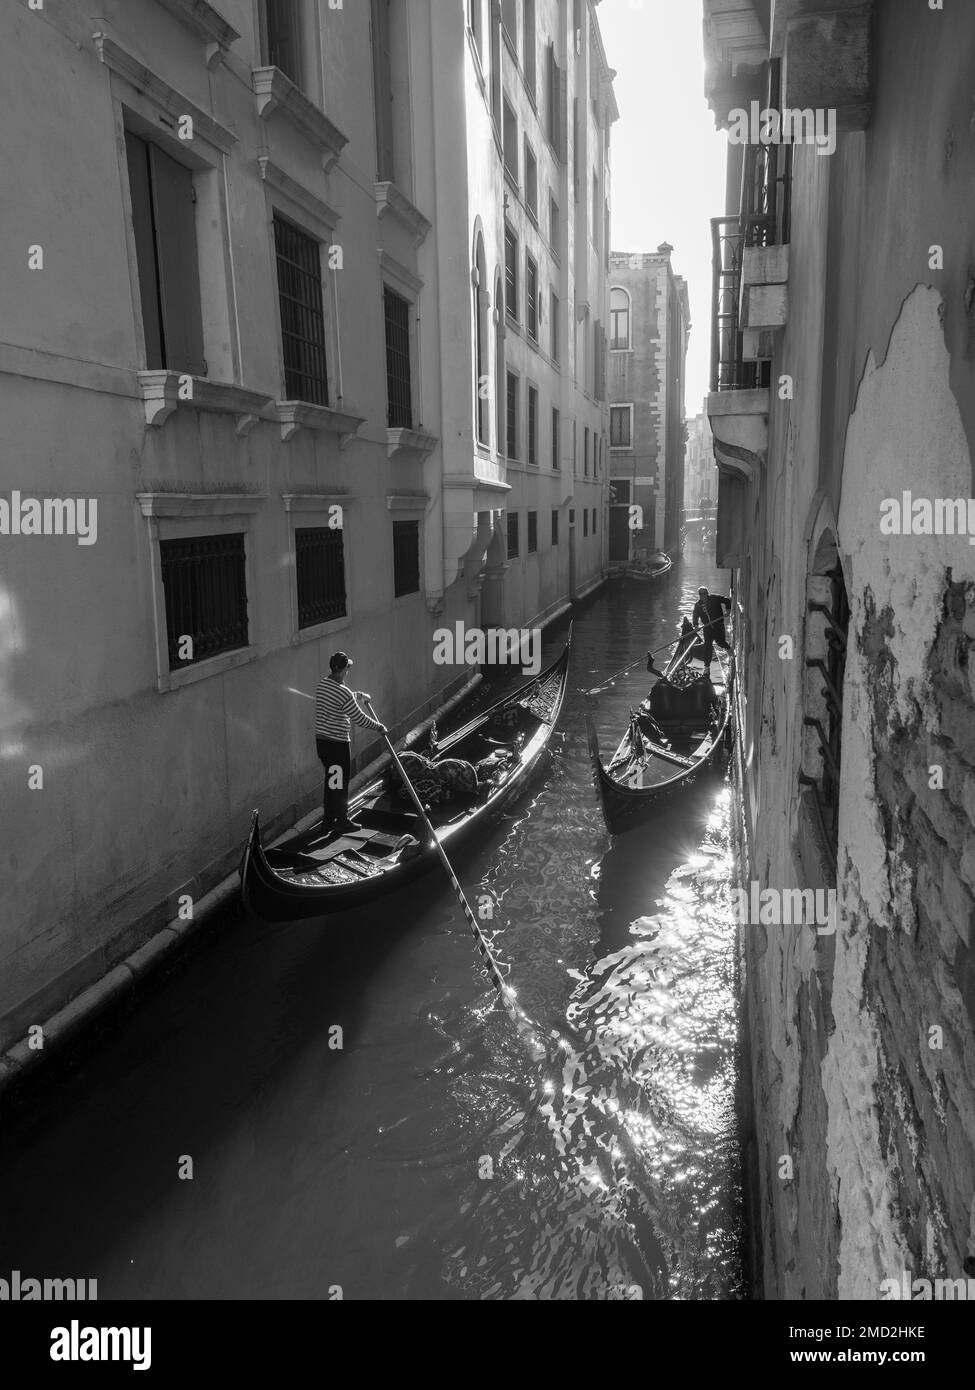 October 31, 2022 - Venice, Italy: Black and white photo of two gondolas in a canal of Venice. Tourism concept. Stock Photo